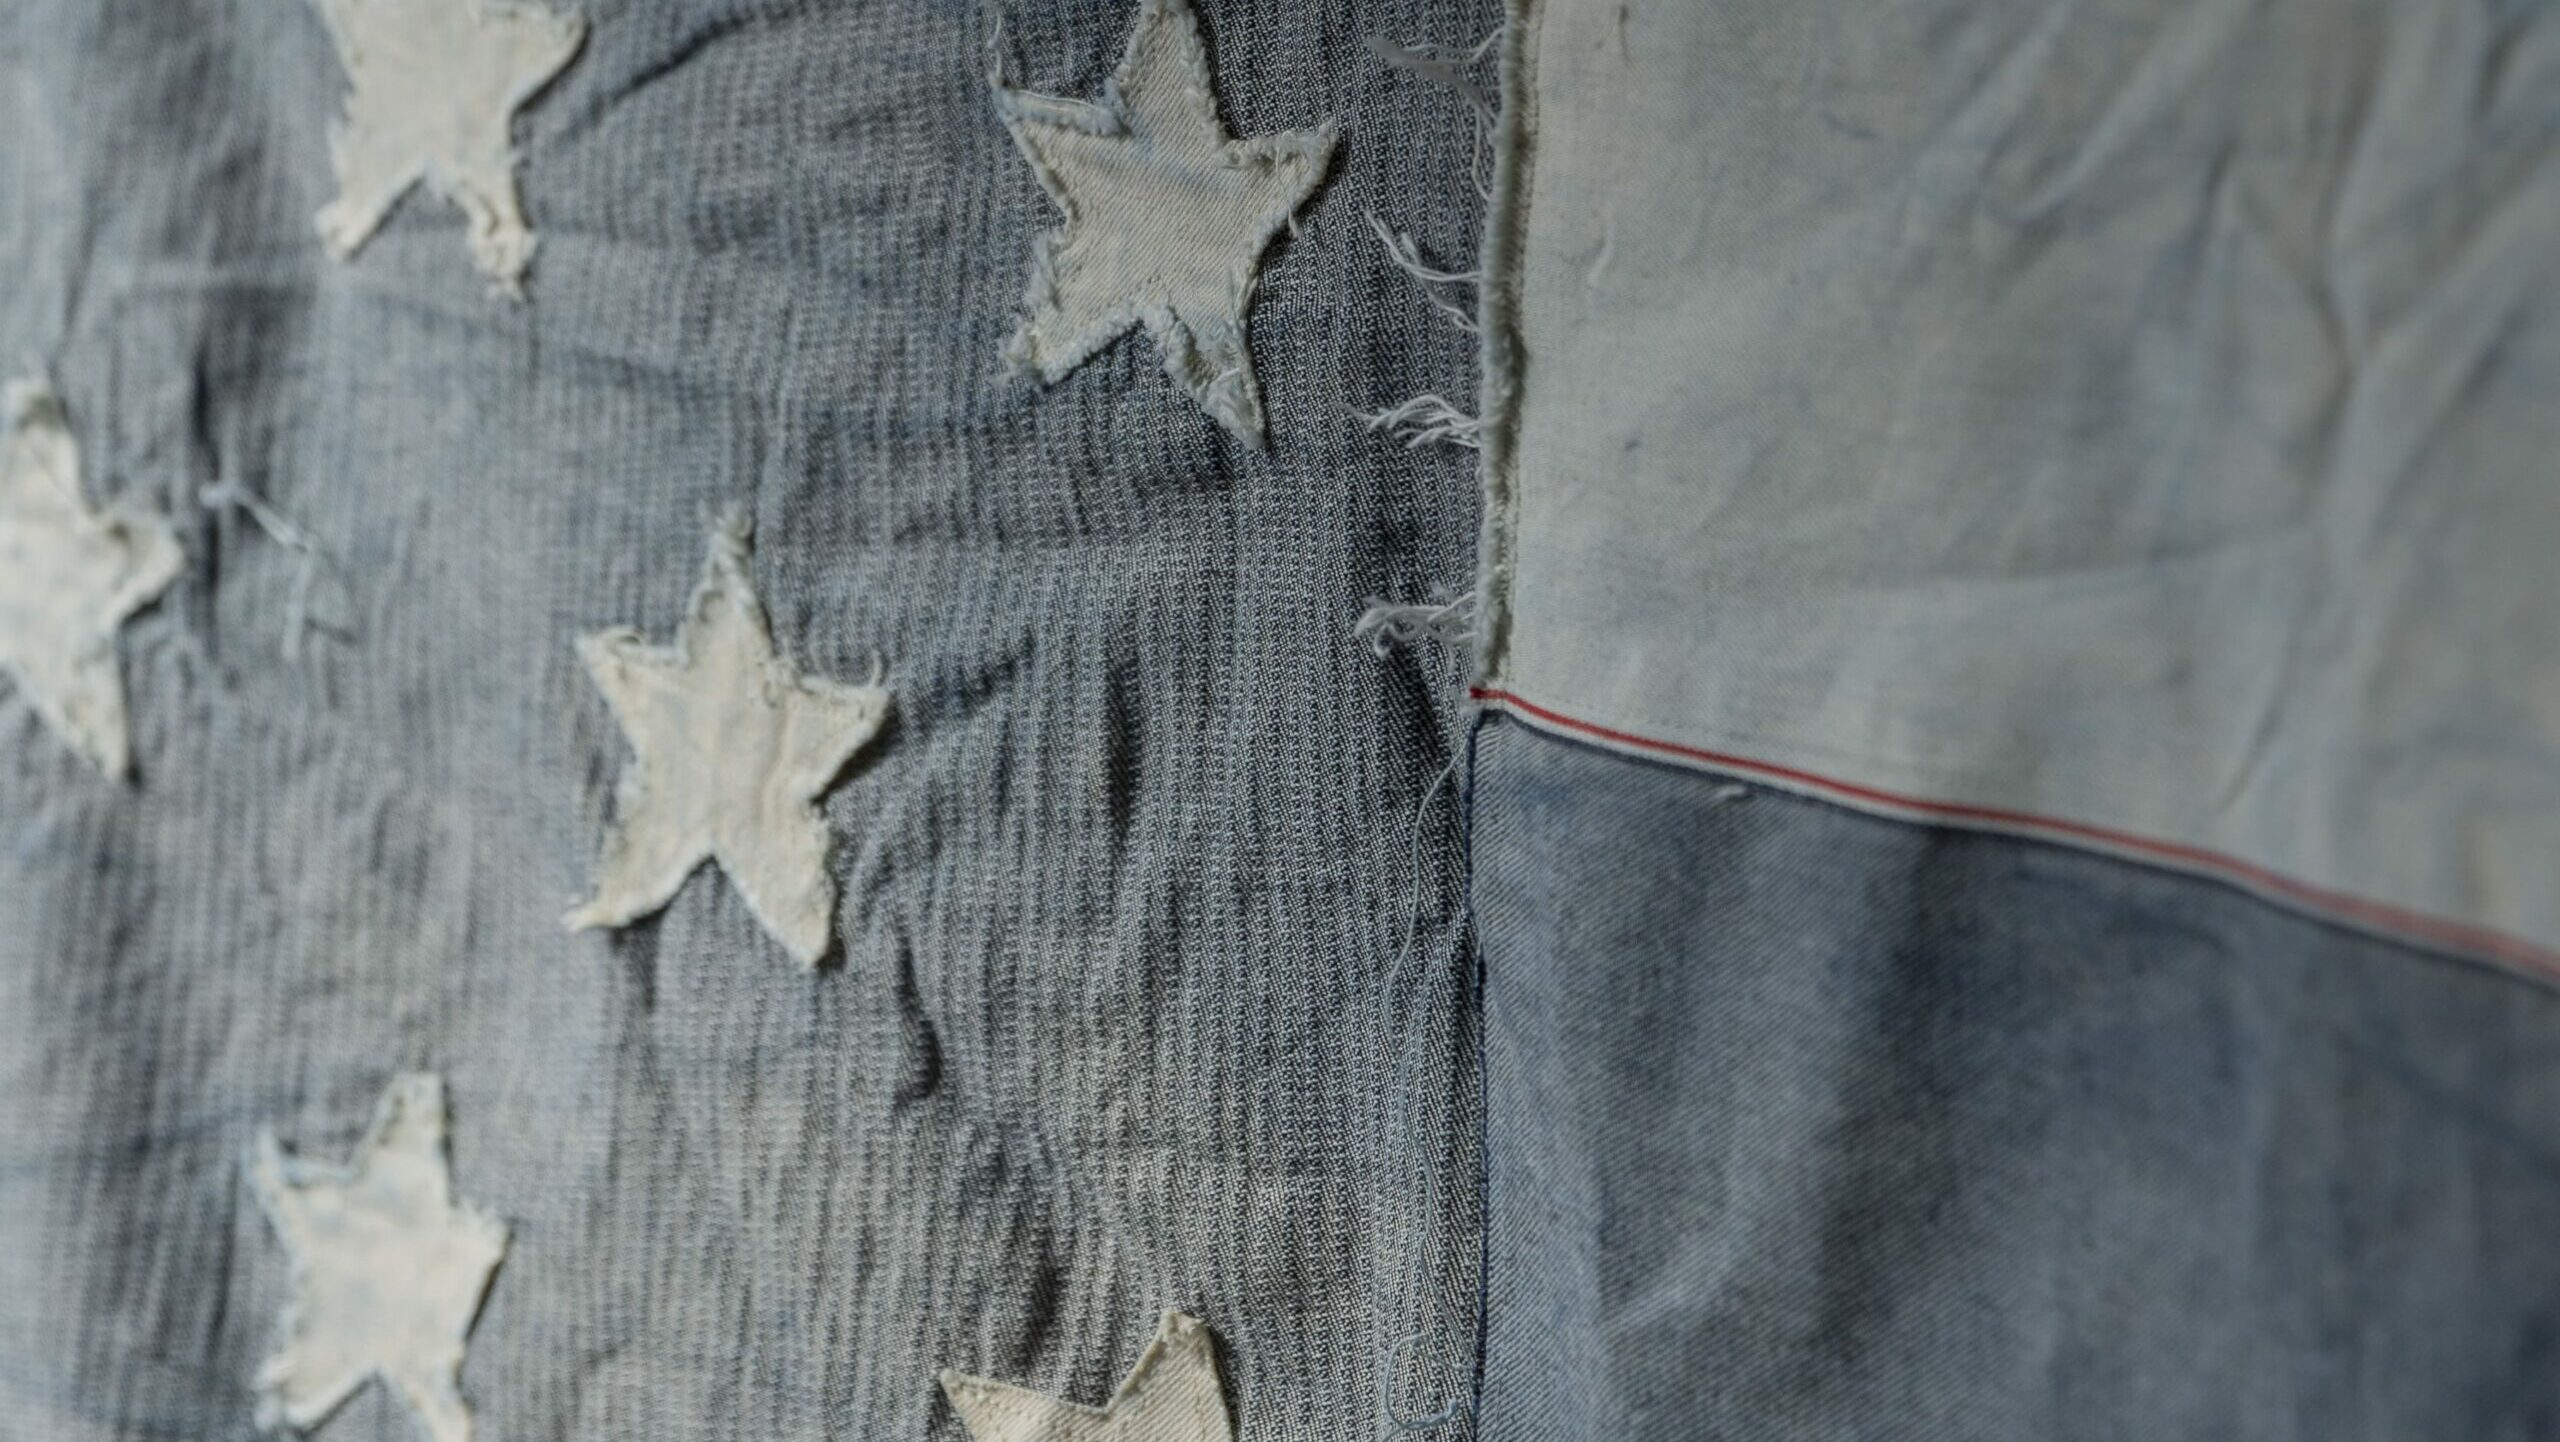 Raleigh Denim Launches a Perfect Pair of American-Made $100 Jeans